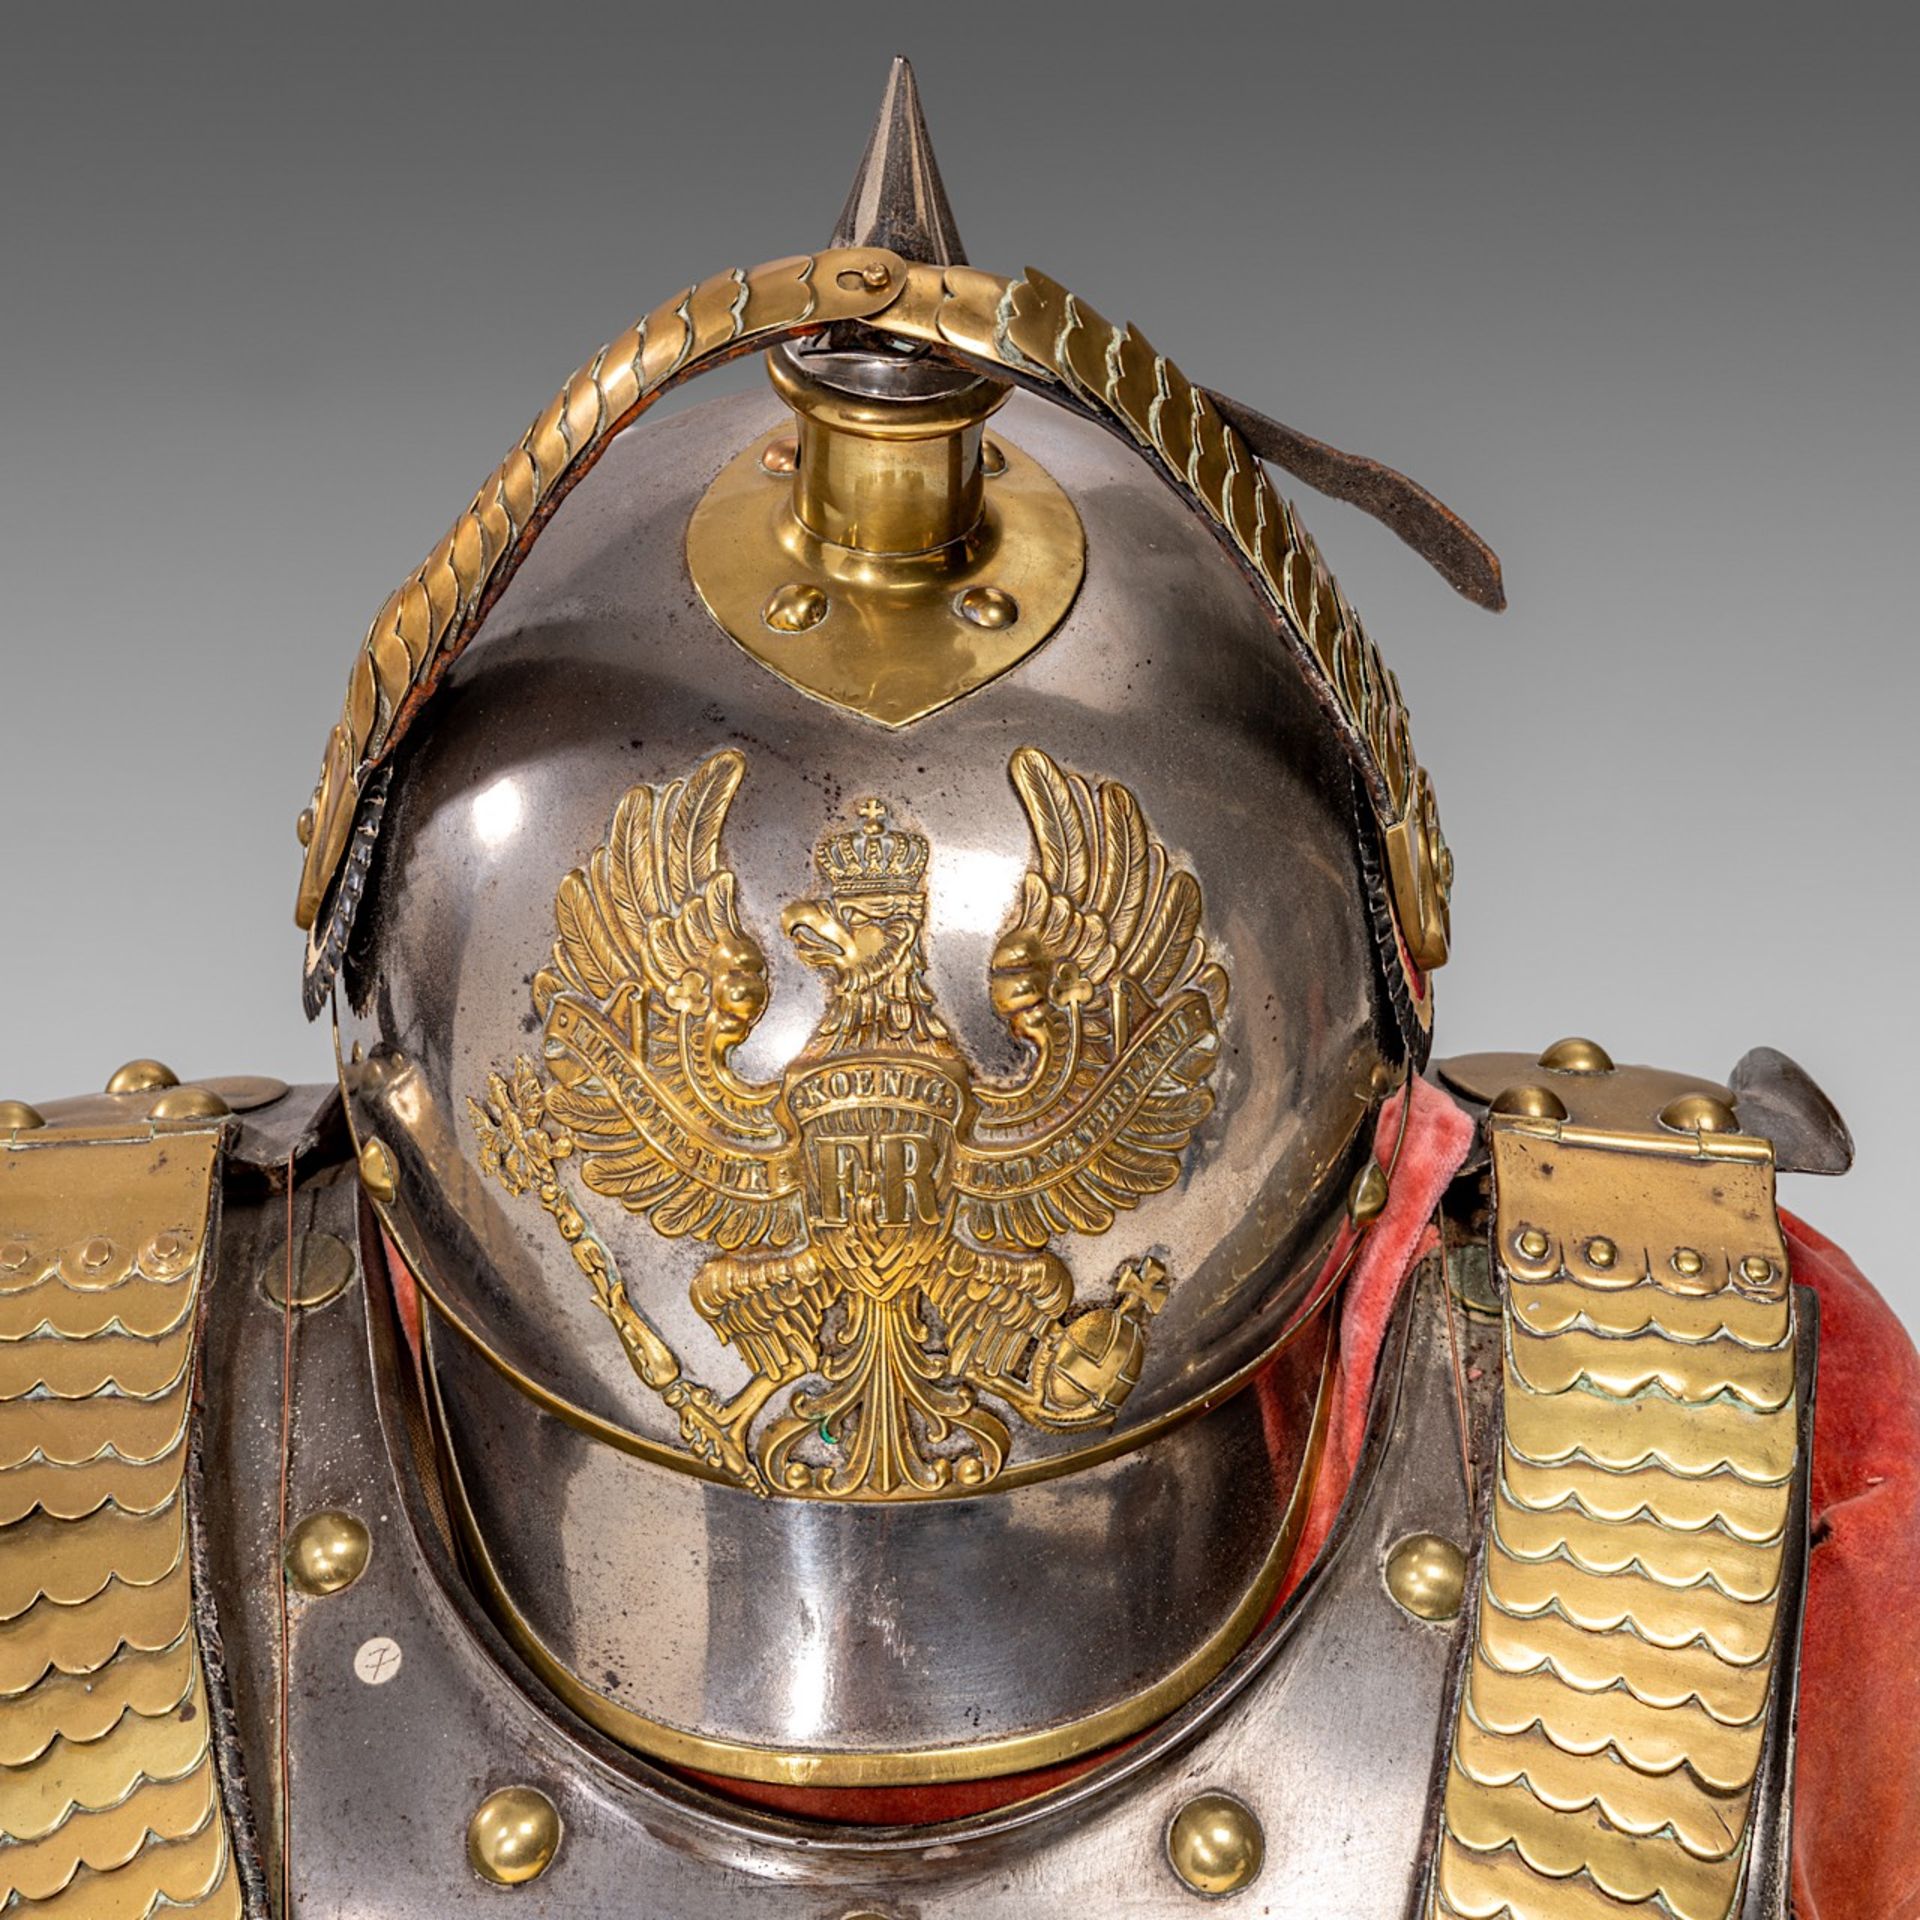 Cuirass and helmet, metal and gilded brass, 19thC., 68 x 30 x 36 cm. (26.7 x 11.8 x 14.1 in.) - Image 8 of 8